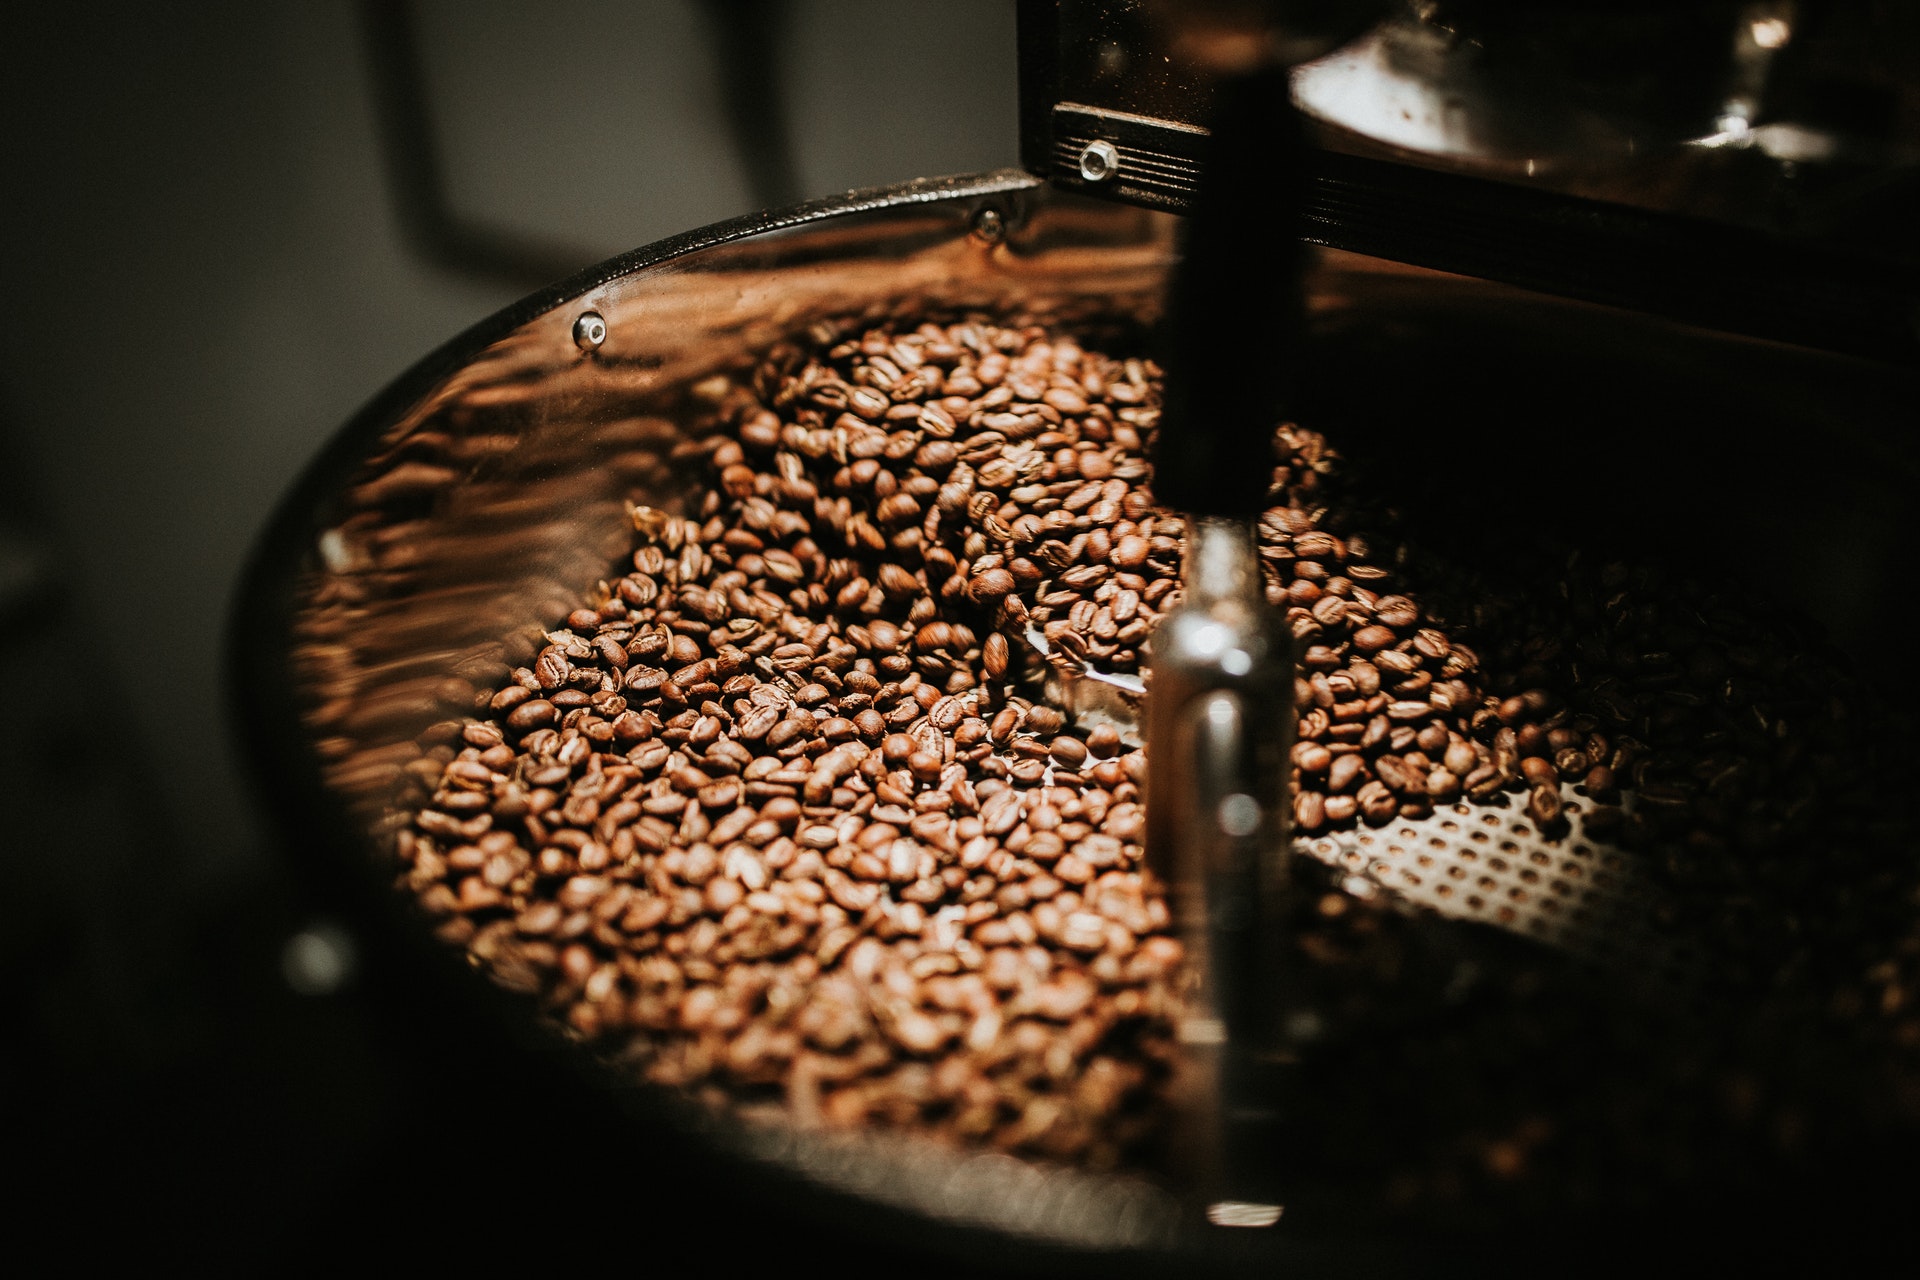 Engineers Find a Way to Make Coffee as Replacement to Diesel Fuel